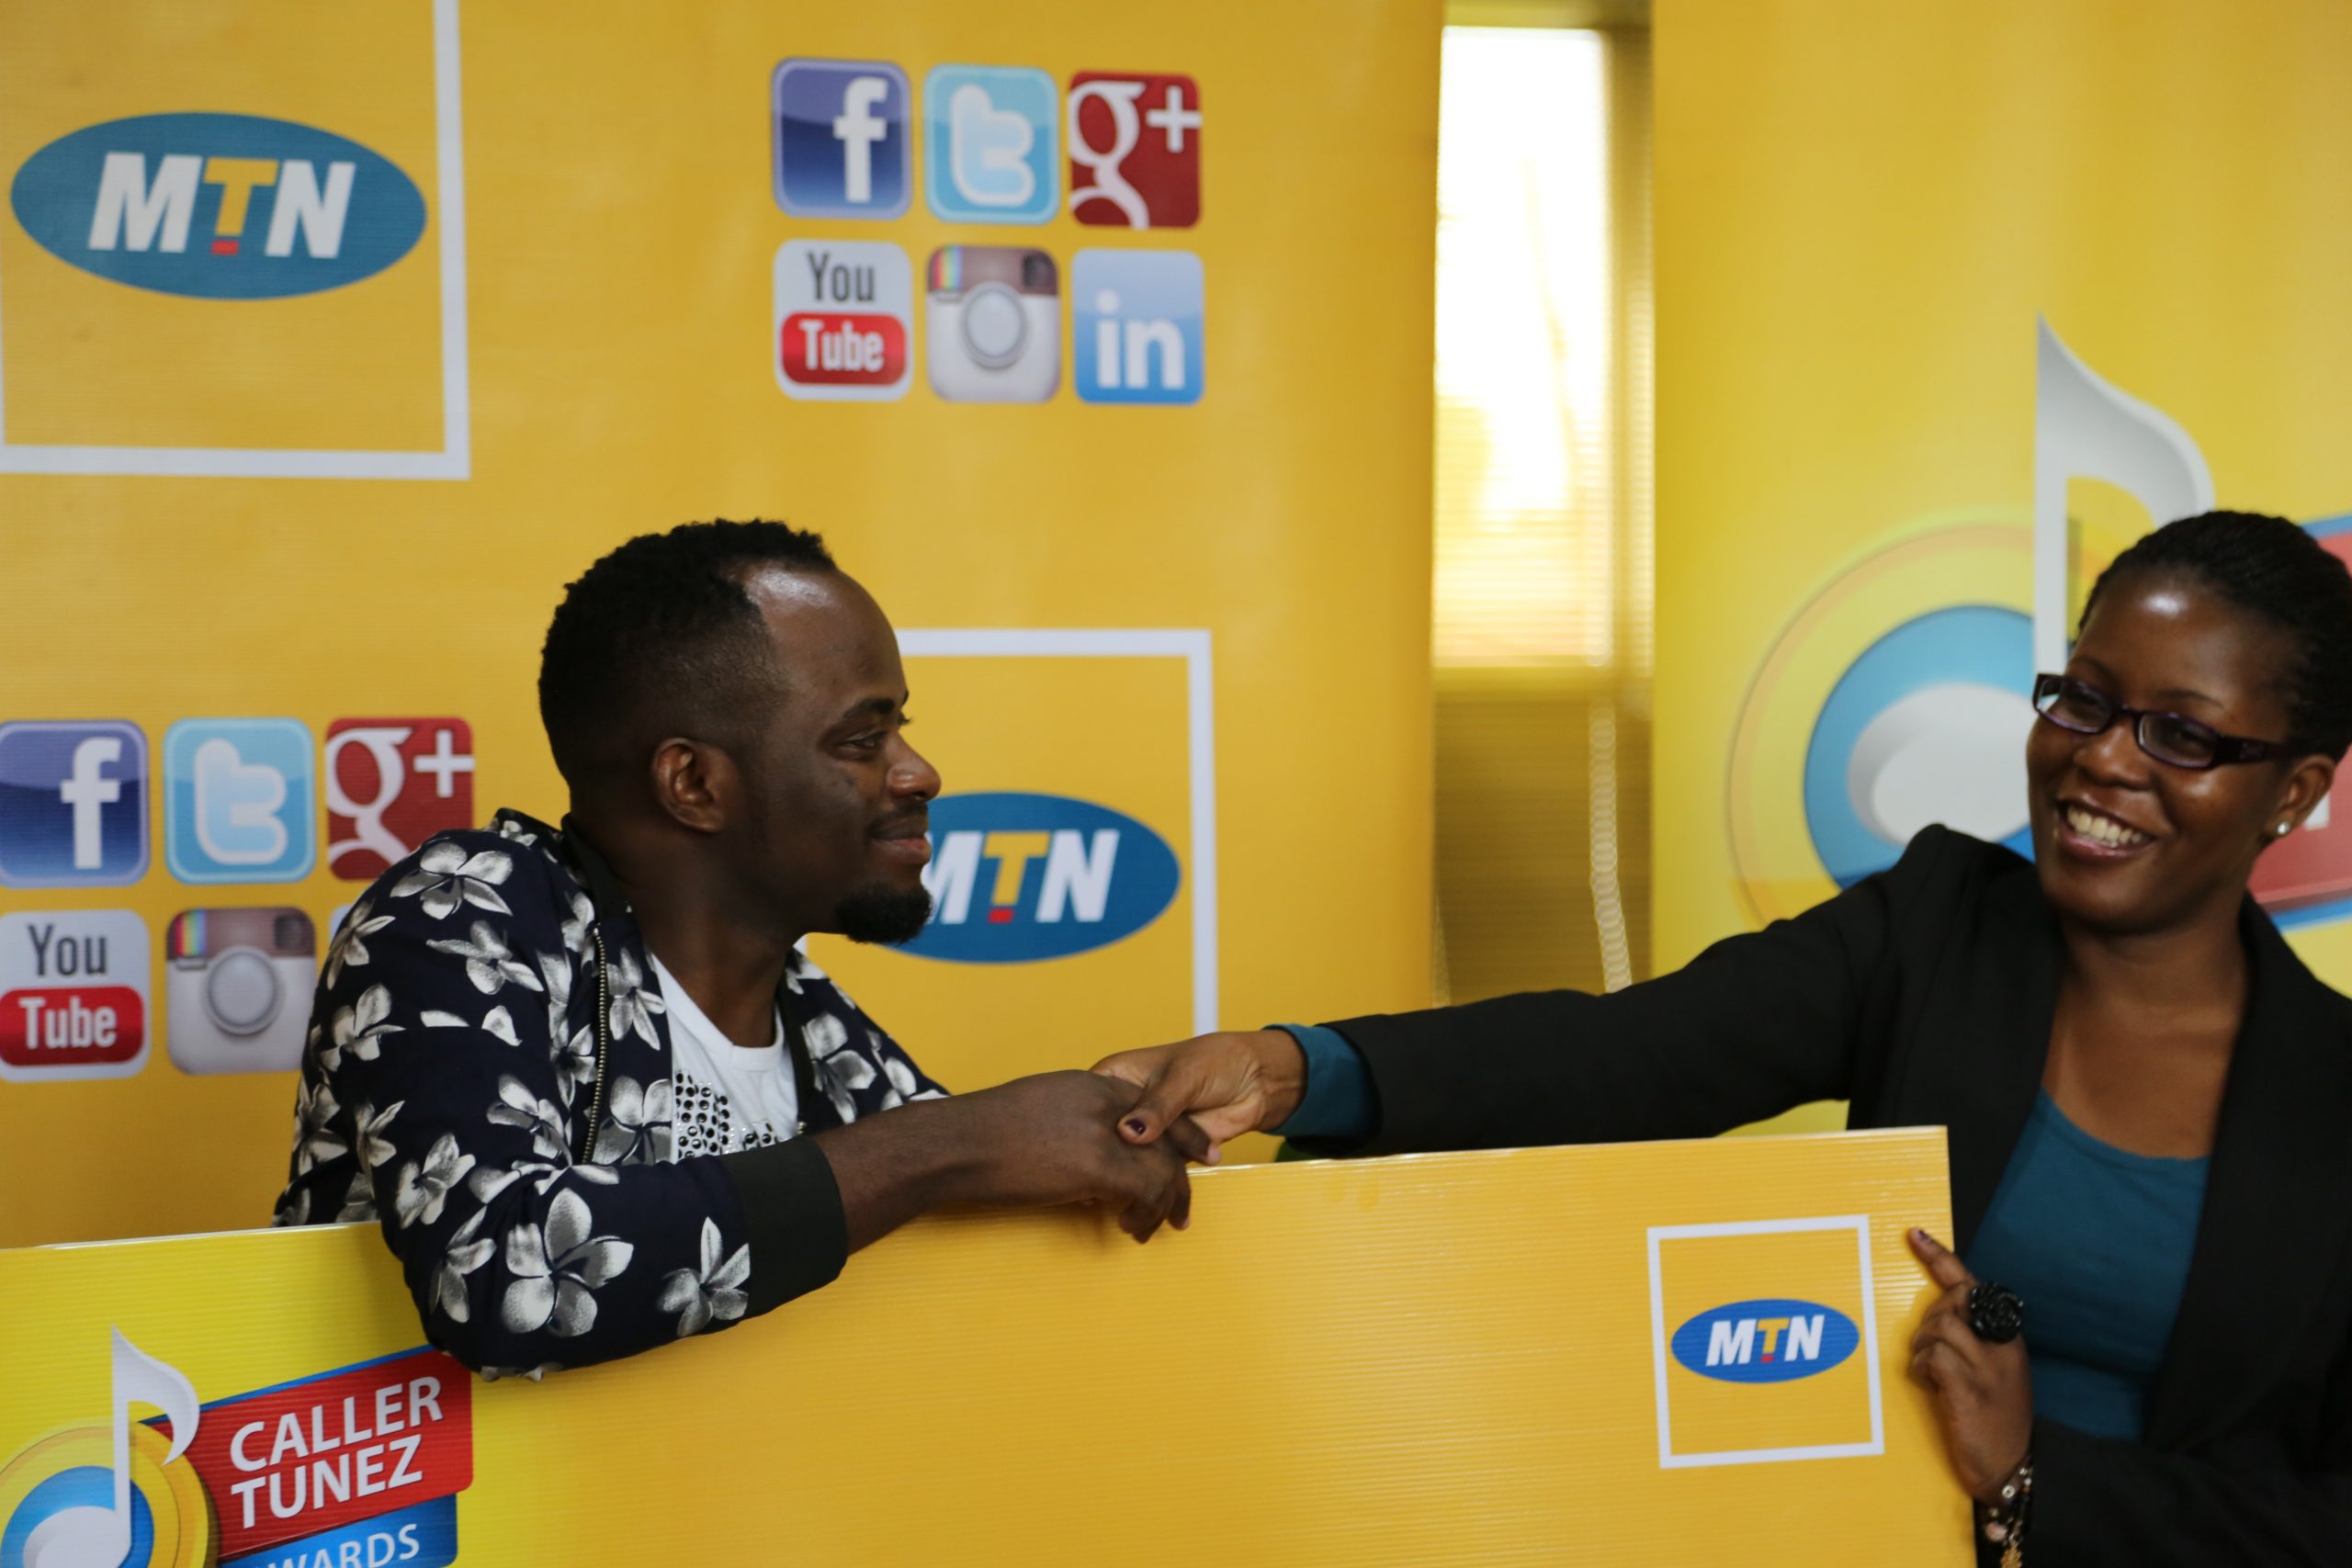 MTN’s Retention and social media manager Susan Kayemba hands a Dummy Cheque to David Lutalo at the MTN CRBT Awards prize handover held at MTN Nyonyi gardens. David Lutalo won again 2.5M in the MTN CRBT Awards as the artist ofOctober where his Song “Manya” was the most downloaded song again on the MTN Caller tune portal with 10,964 downloads.